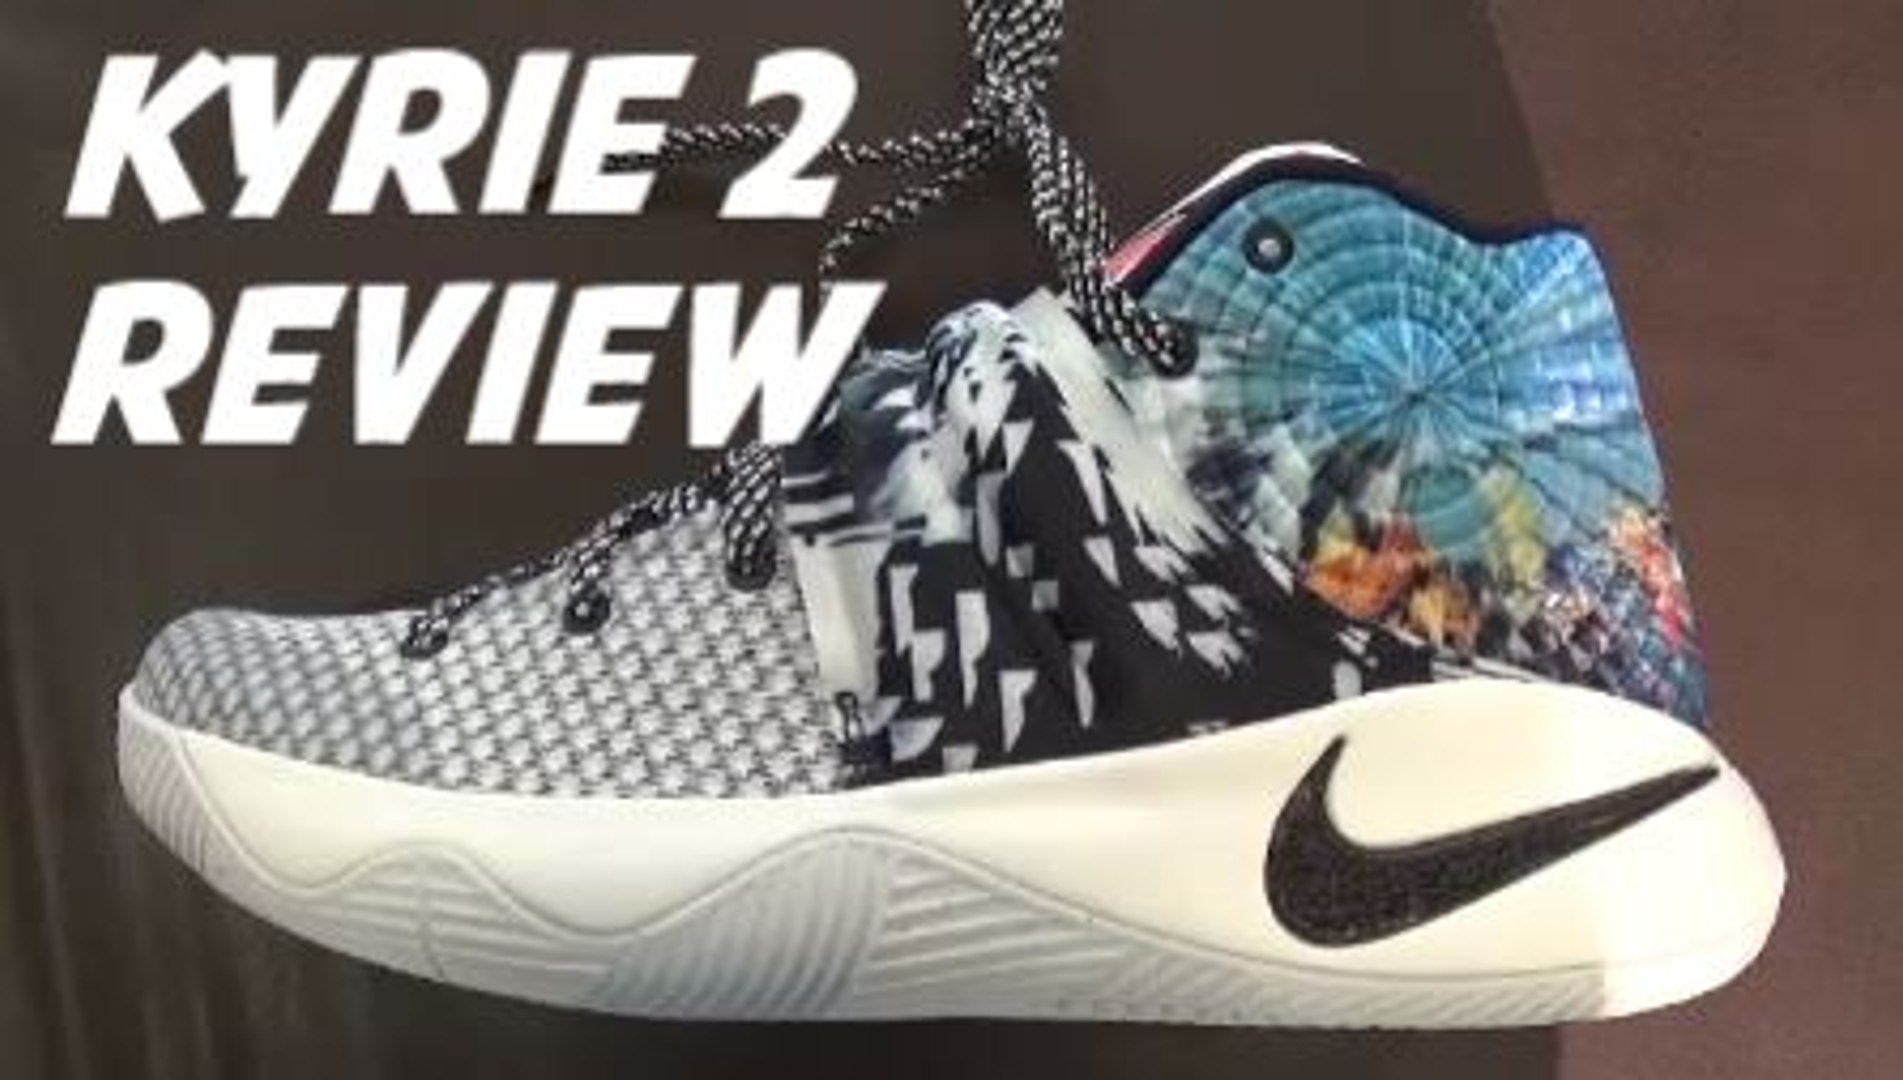 kyrie 2 the effect